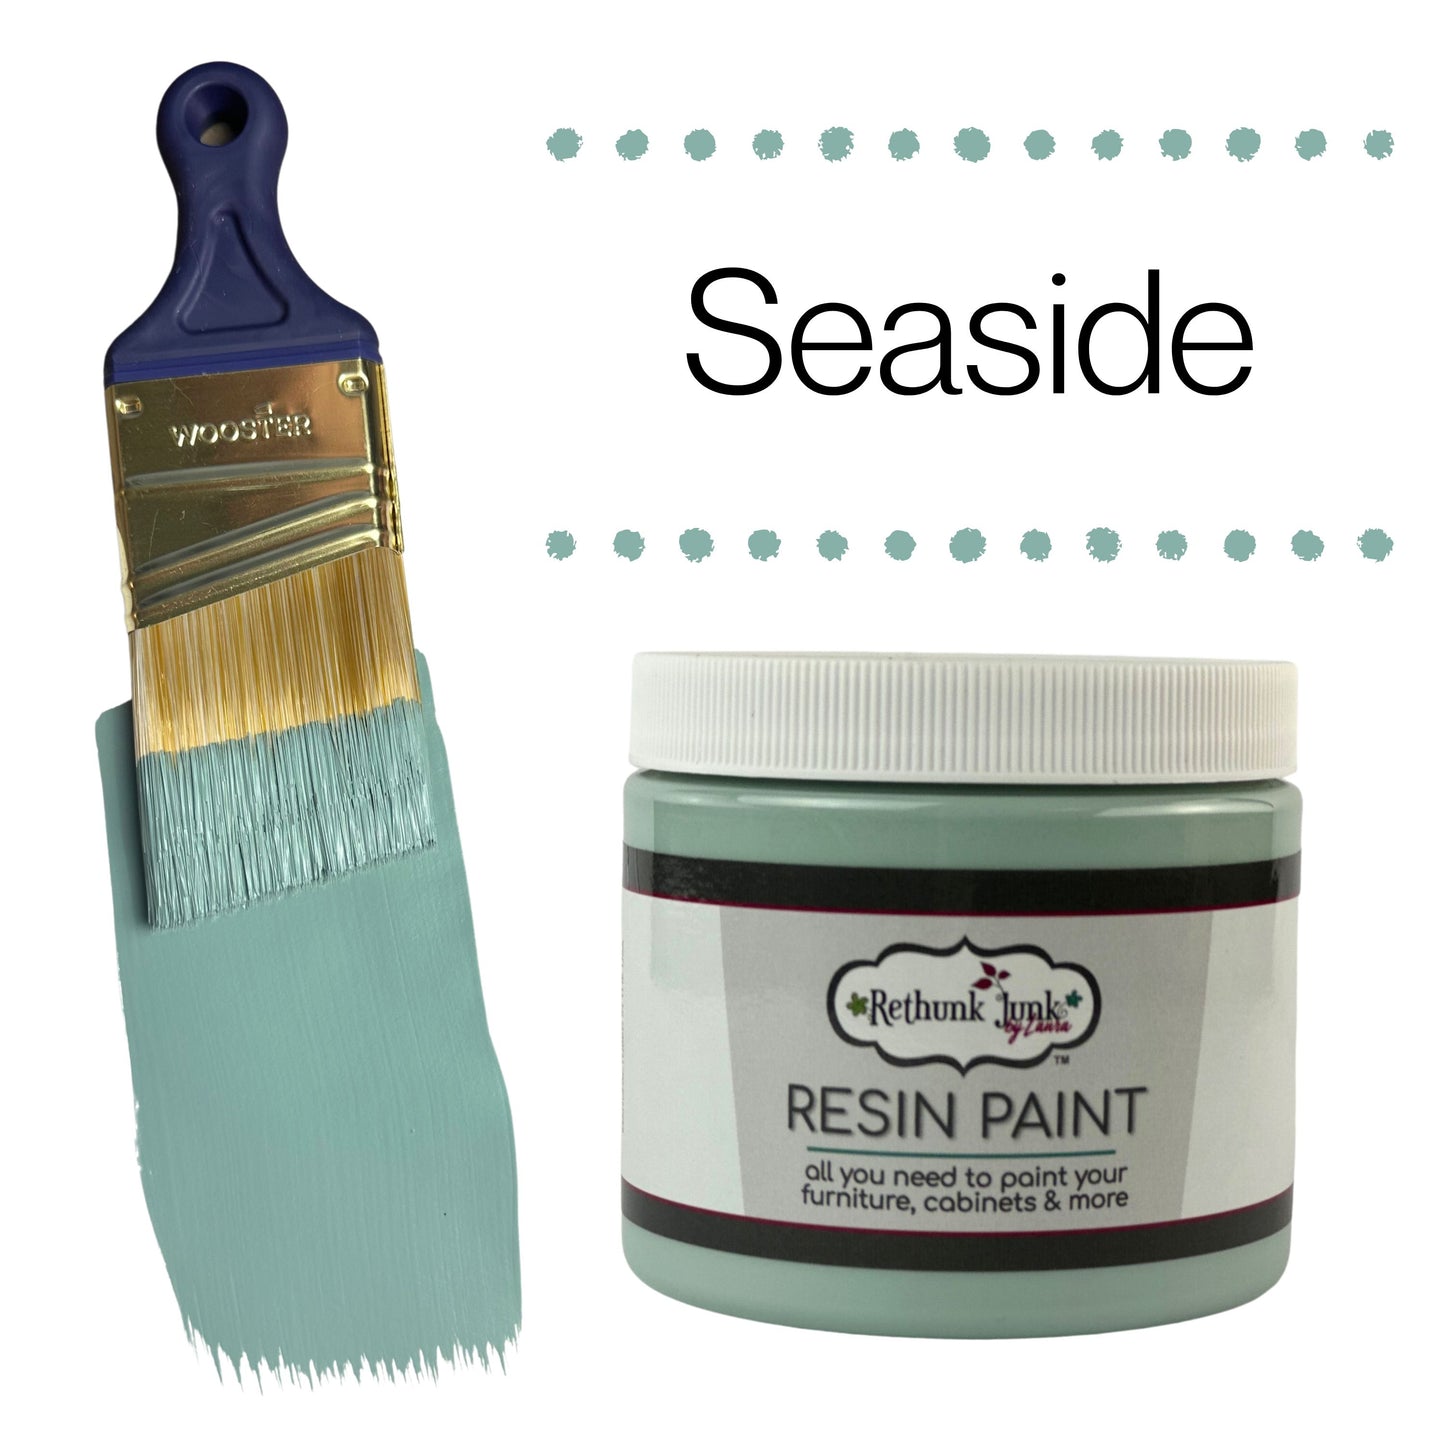 Rethunk Junk by Laura Resin Paint Seaside 32oz